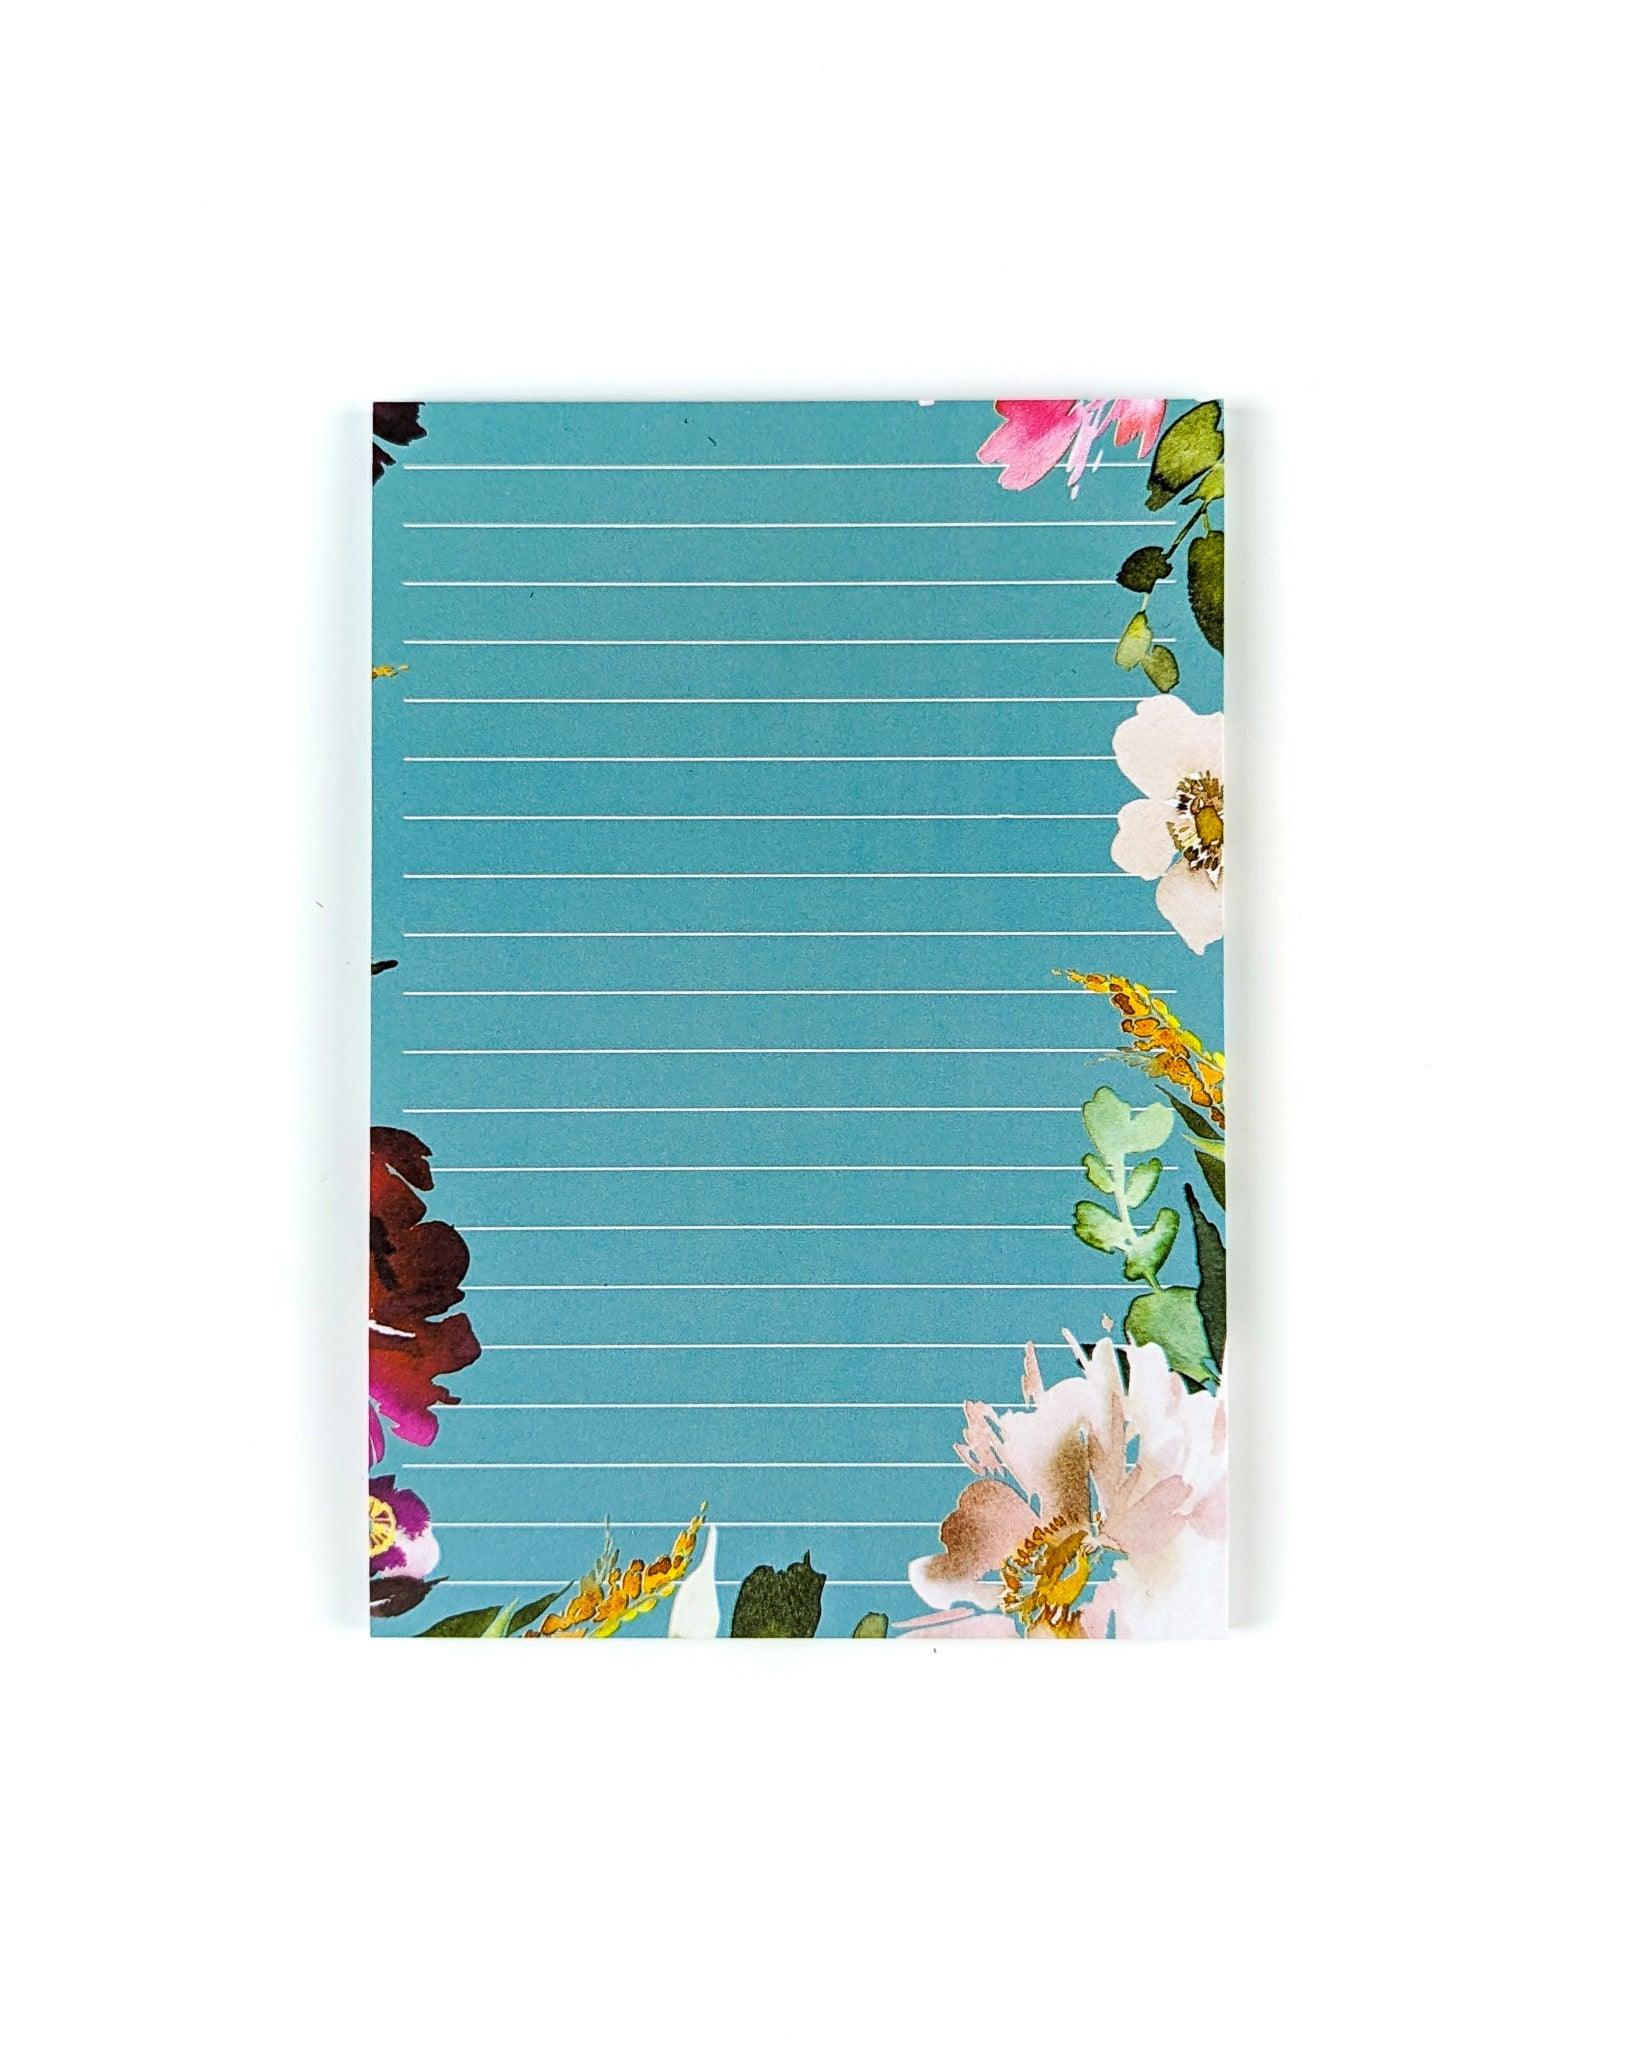 Sticky Note pad in a teal hue with floral around the edges by Jane's Agenda.